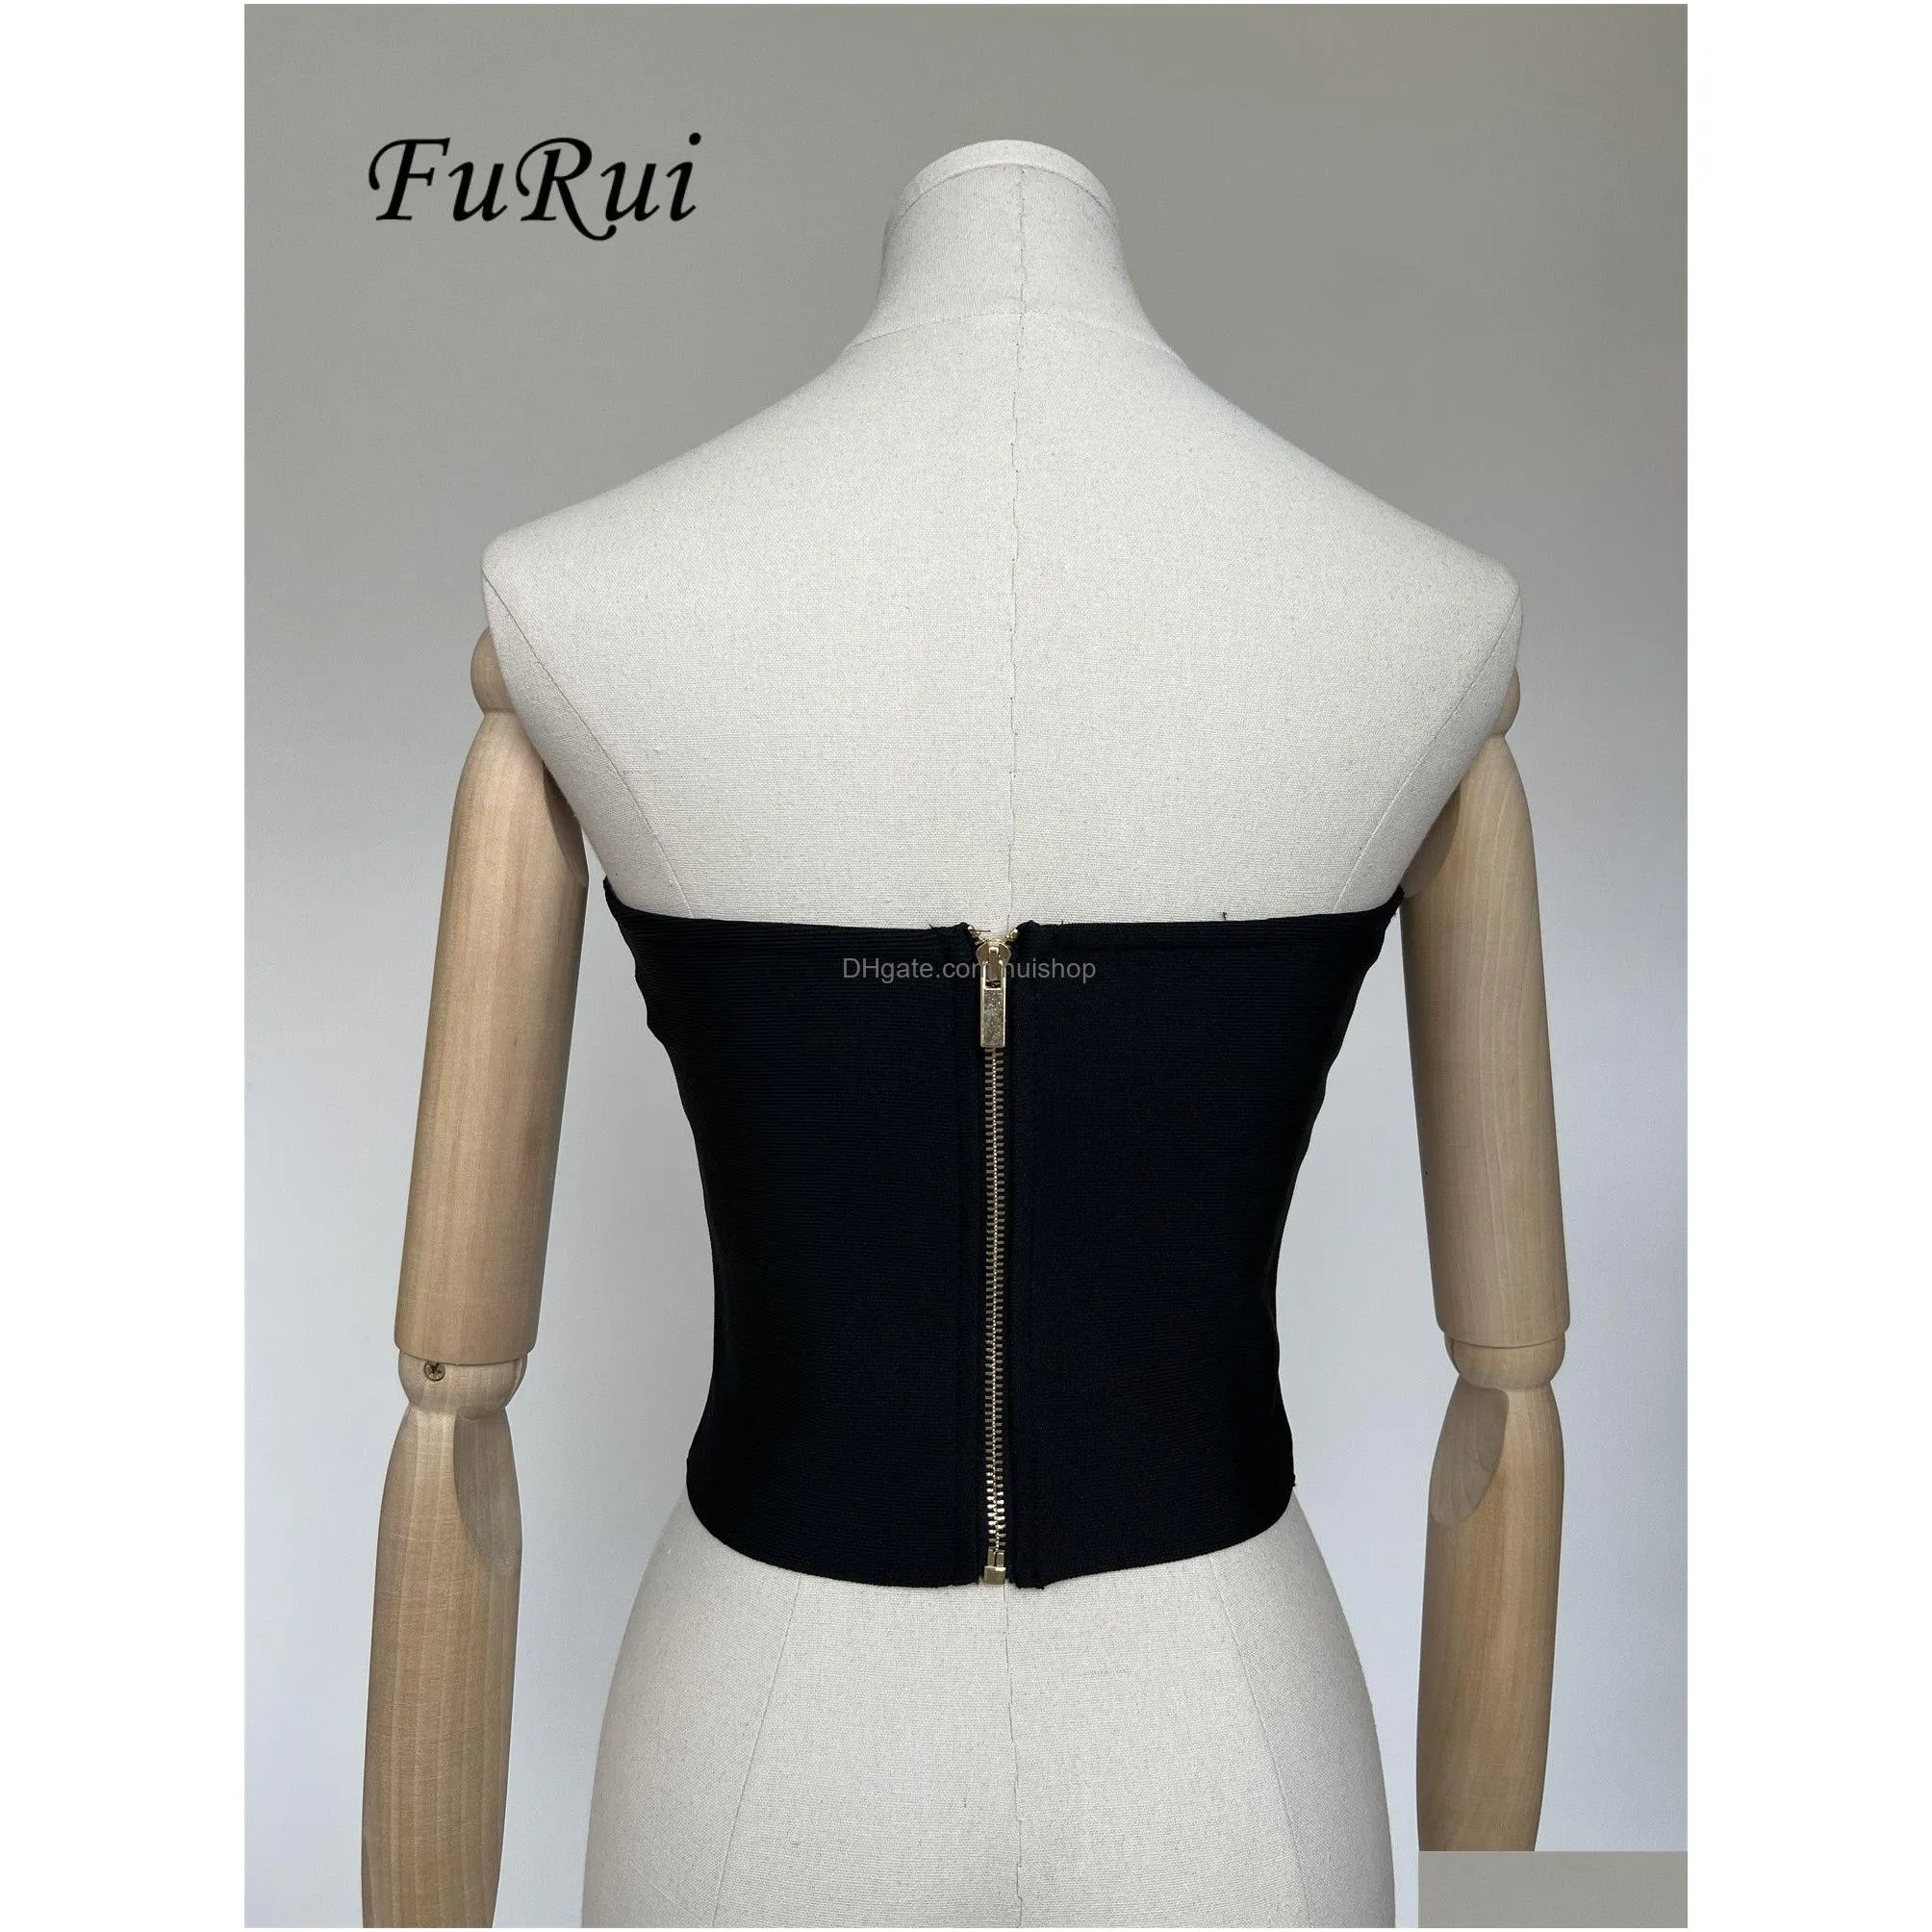 camisoles tanks furui star fashion sexy black v-neck tops strapless short bandage crop tops vest in stock within 24 hours 230411